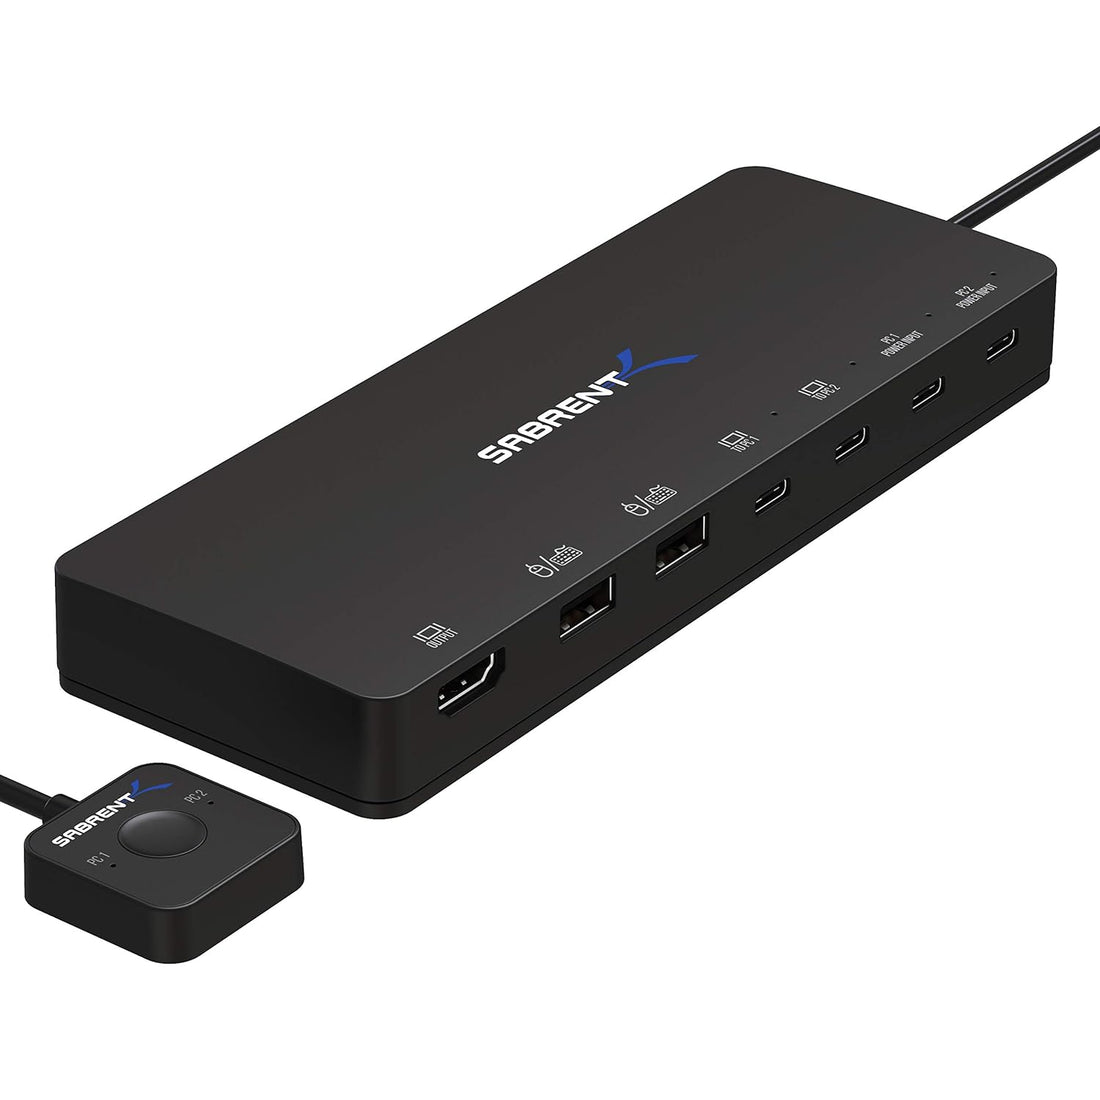 Sabrent 2-Port USB Type-C KVM Switch with 60 Watt Power Delivery Option (USB-KCPD)